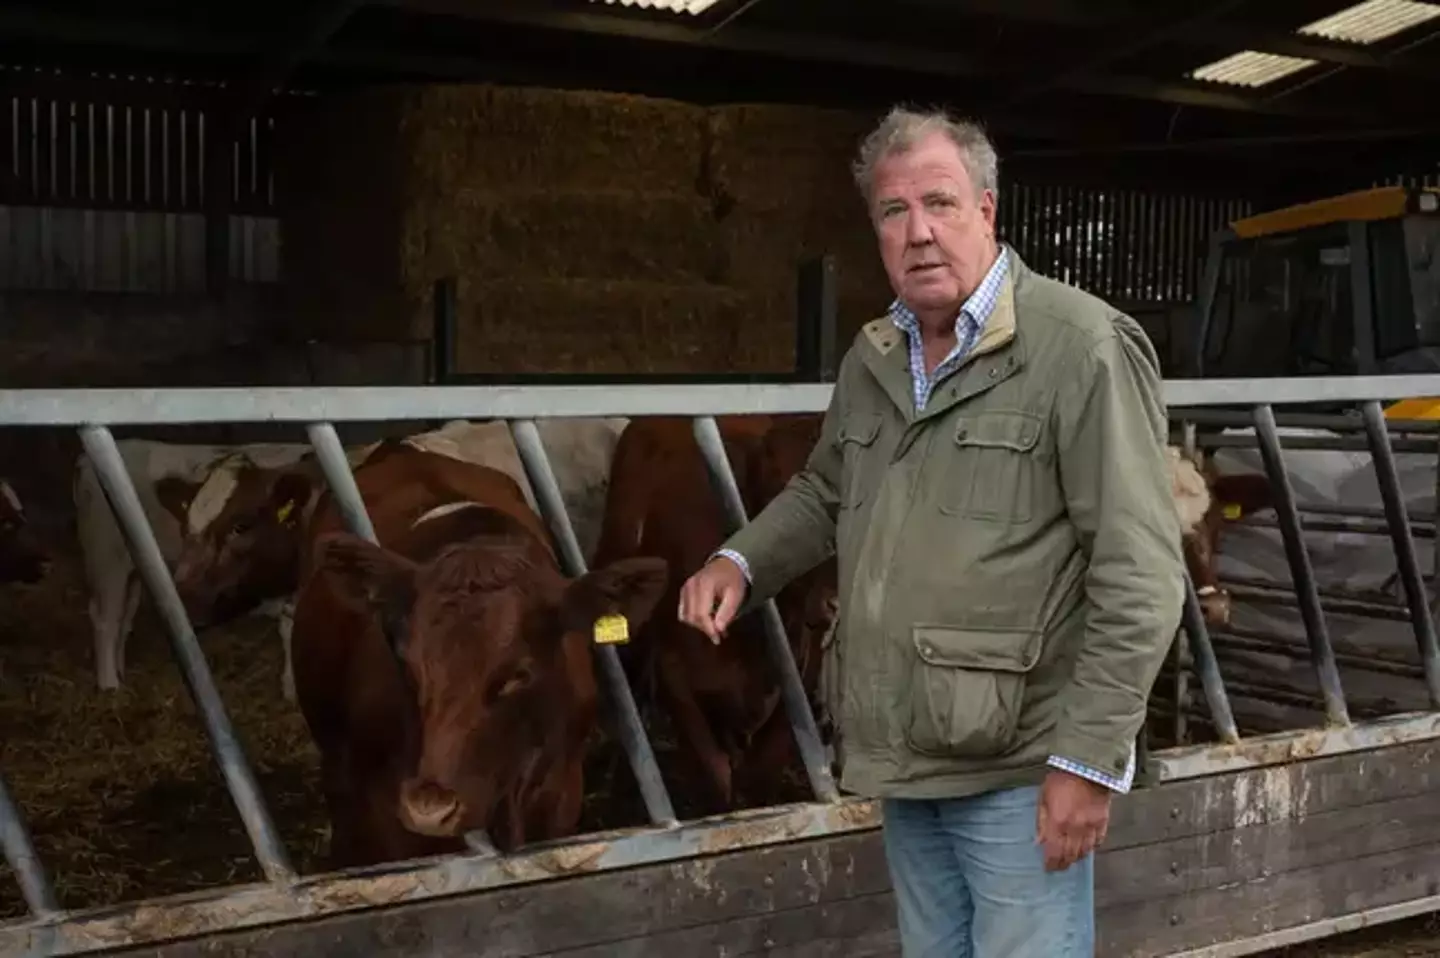 Clarkson's Farm season two examines a range of issues facing British farmers today.